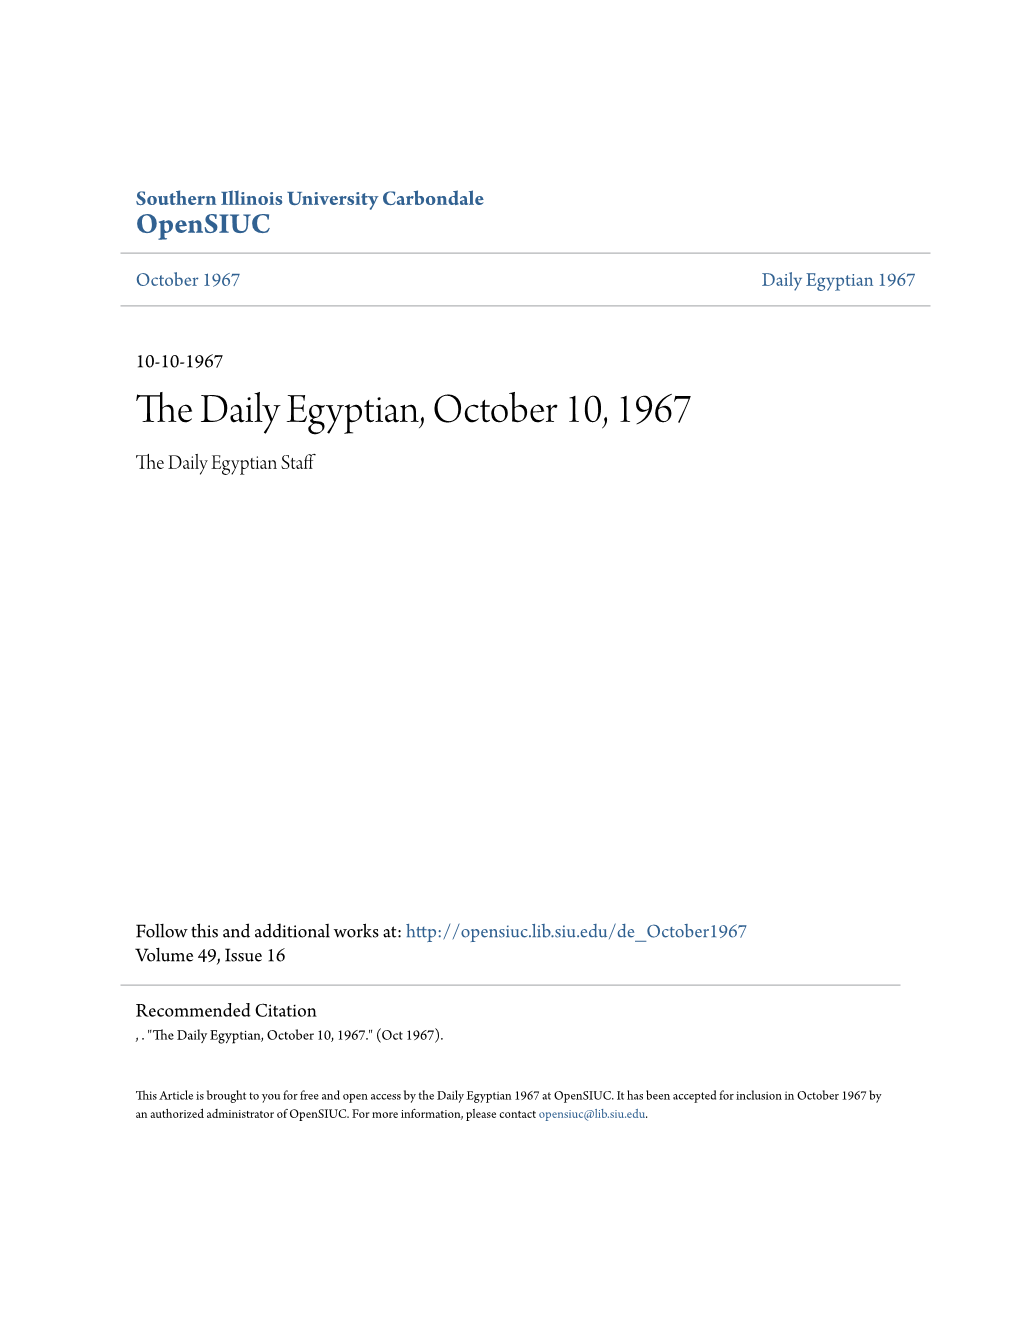 The Daily Egyptian, October 10, 1967